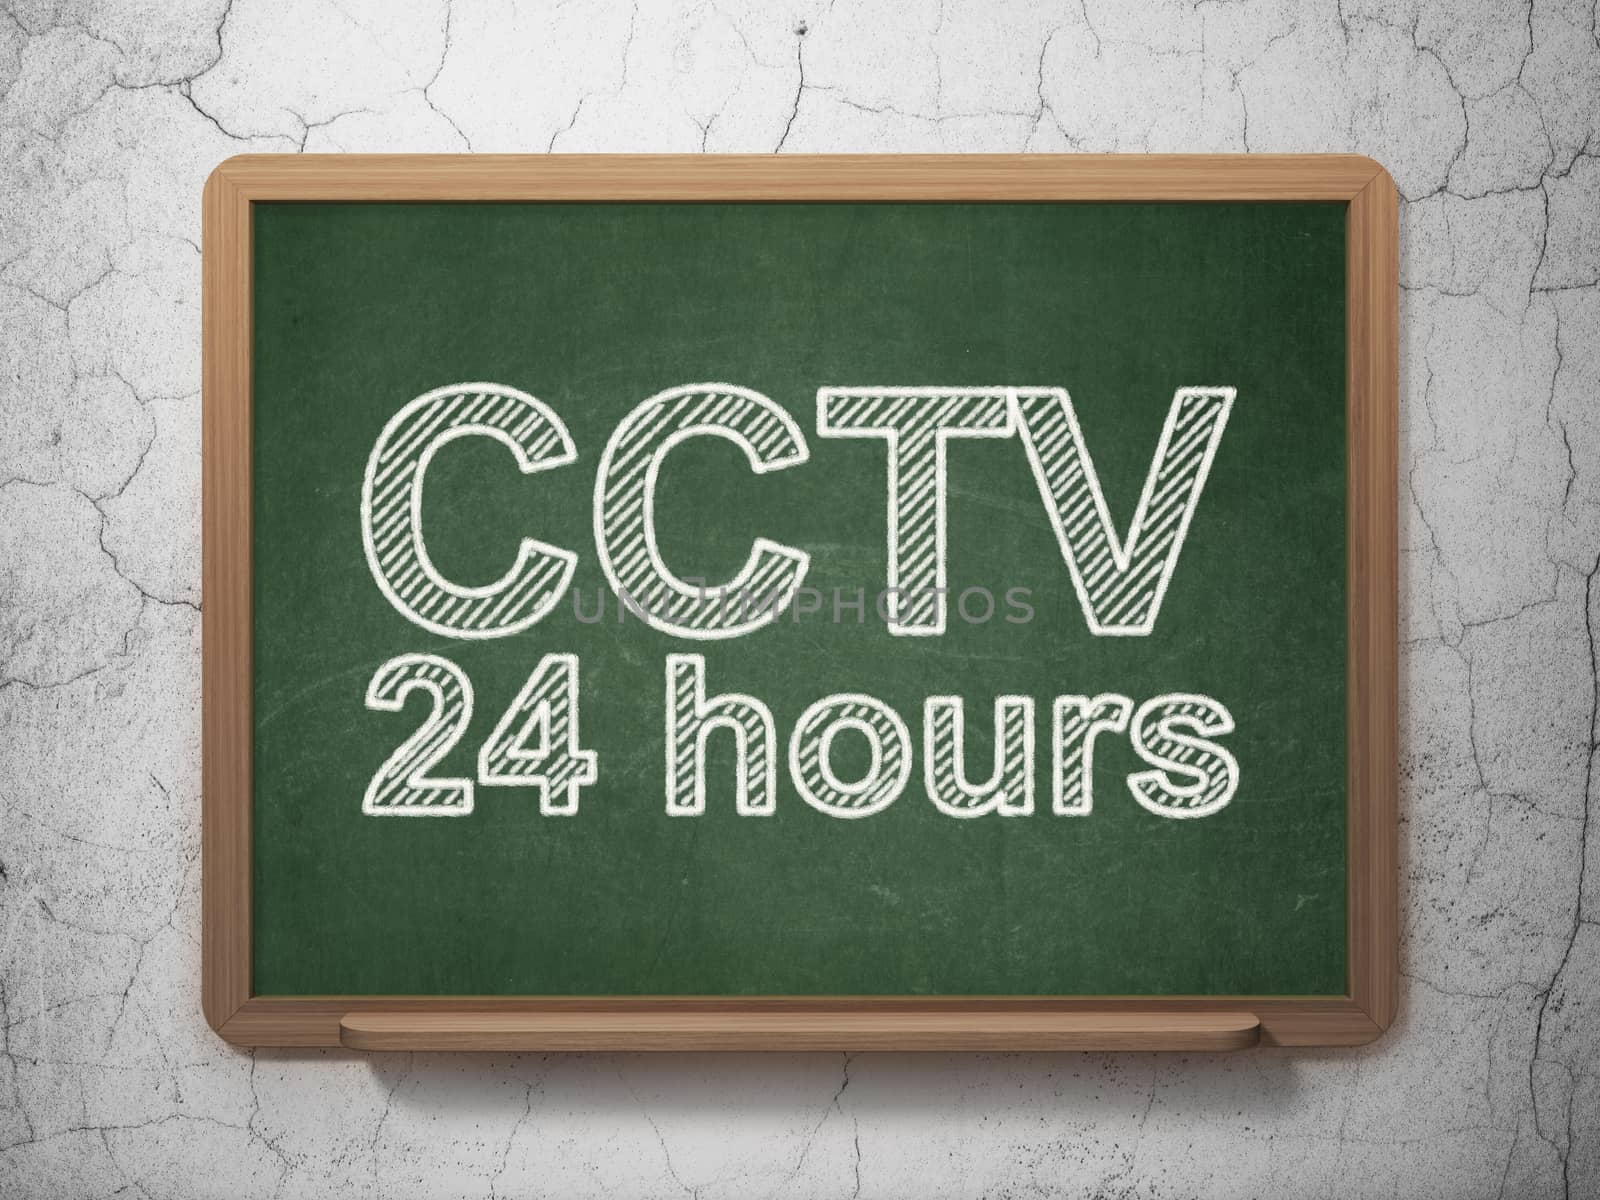 Privacy concept: text CCTV 24 hours on Green chalkboard on grunge wall background, 3D rendering